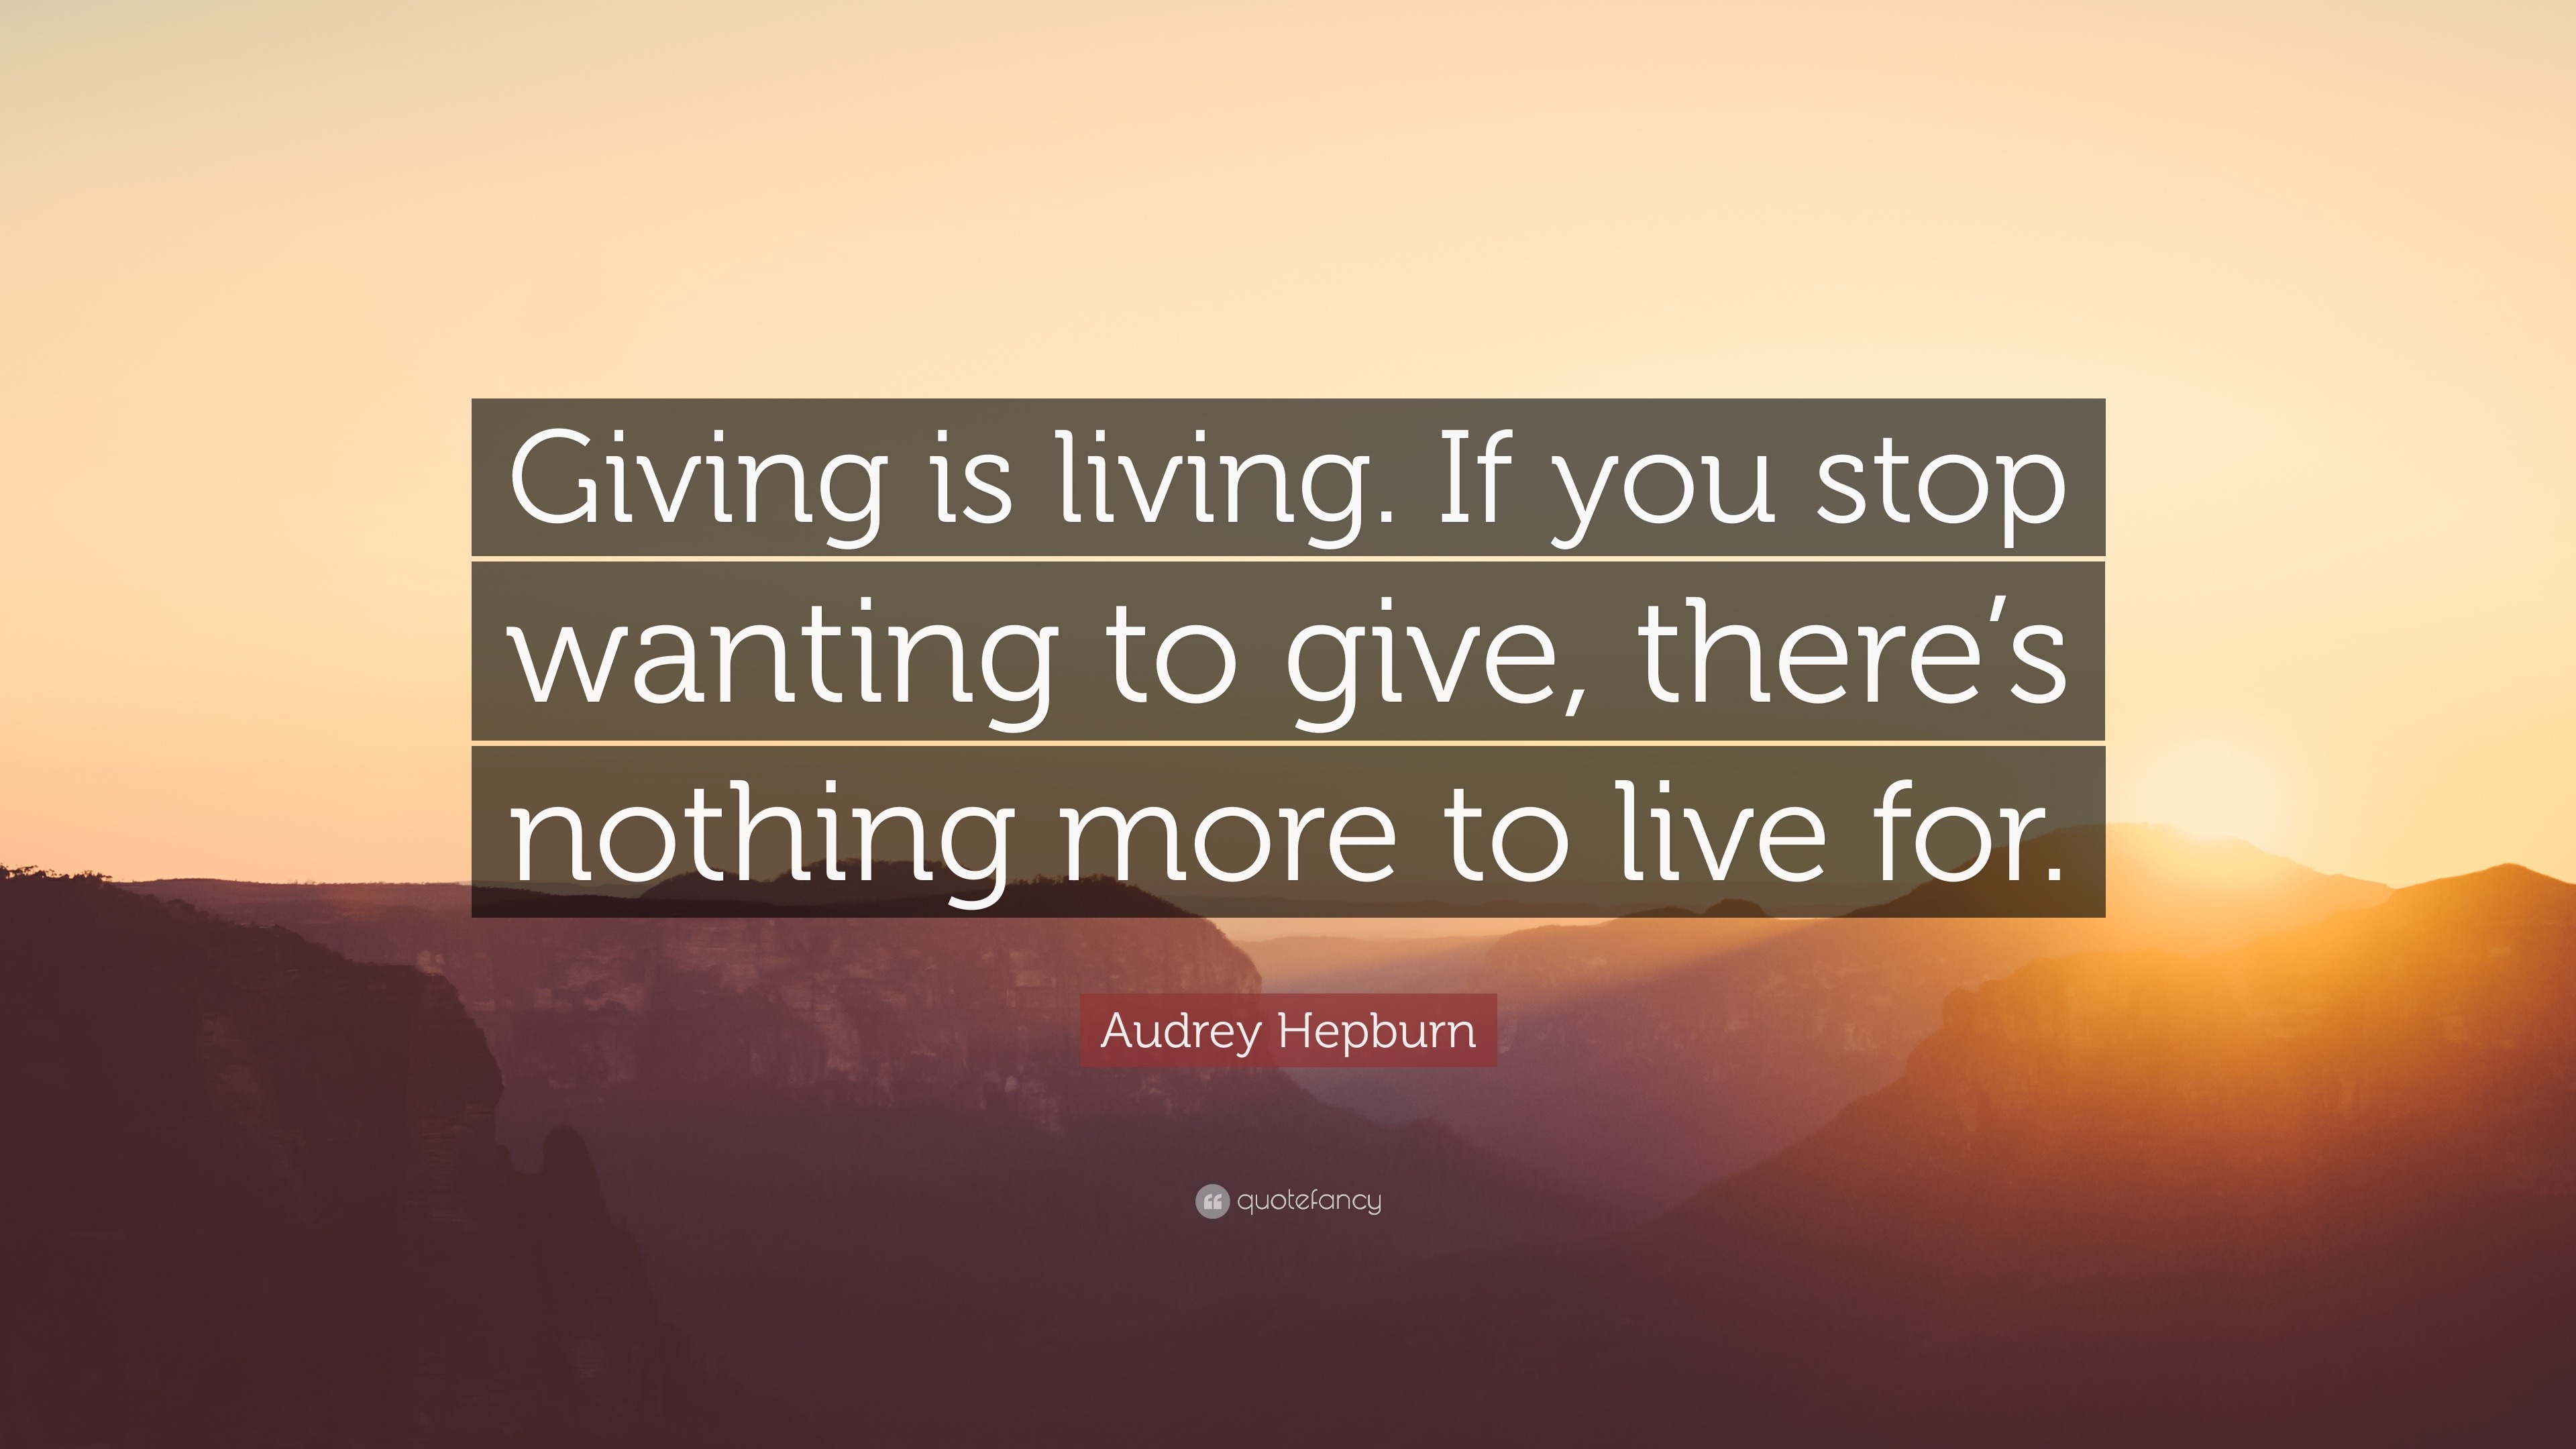 If you stop wanting to give, there’s nothing more to live for. 